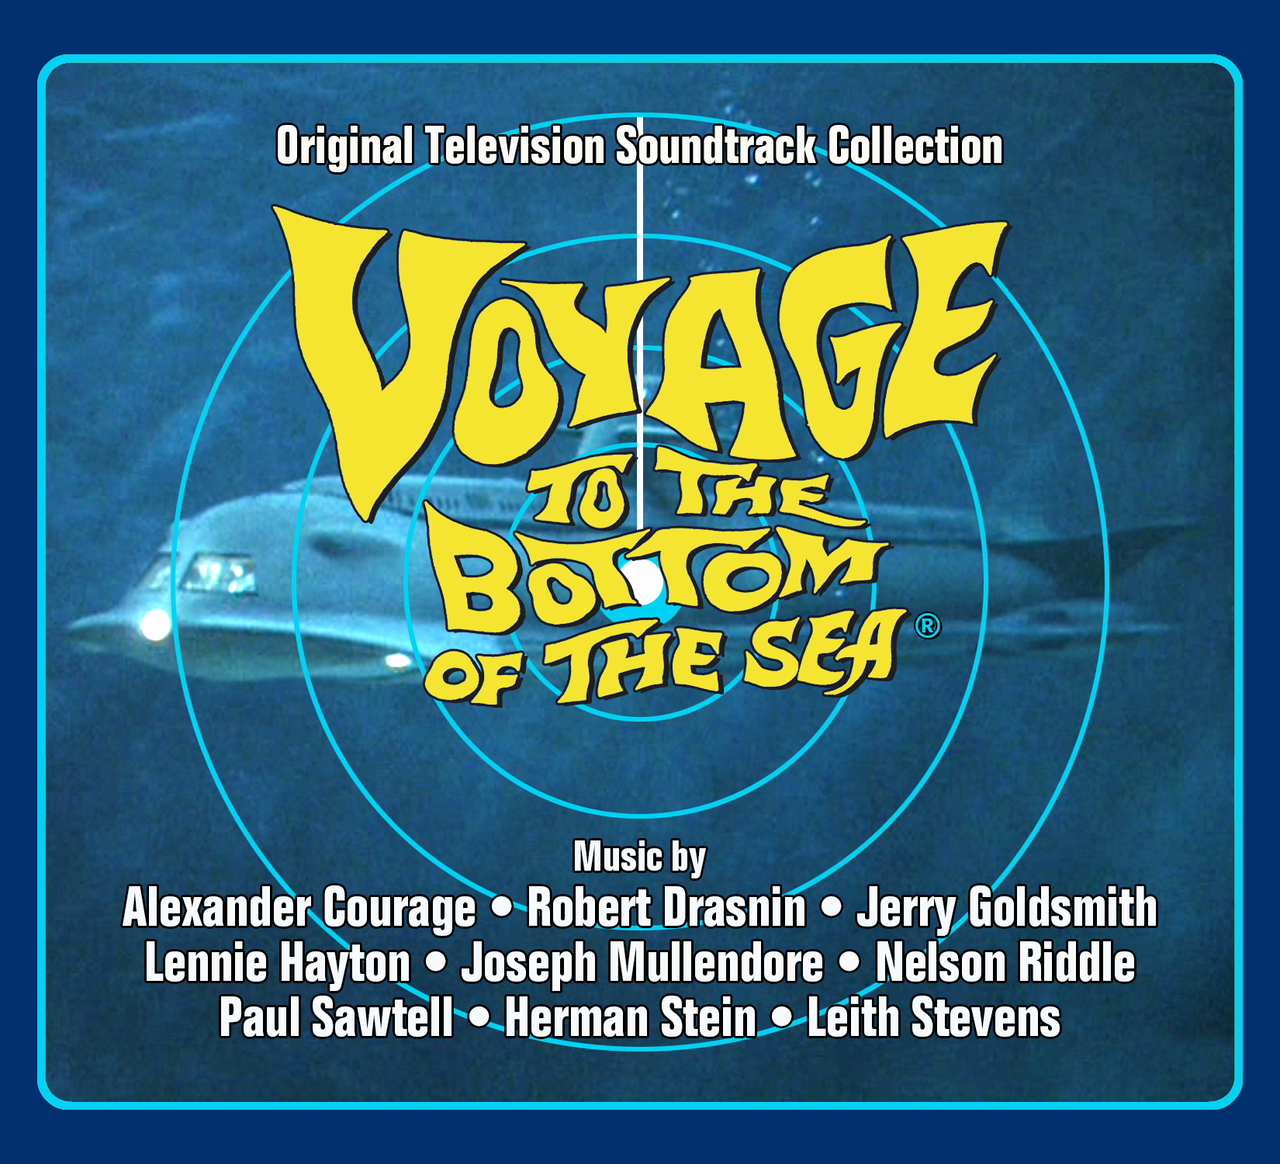 Voyage to the Bottom of the Sea - original TV soundtrack collection